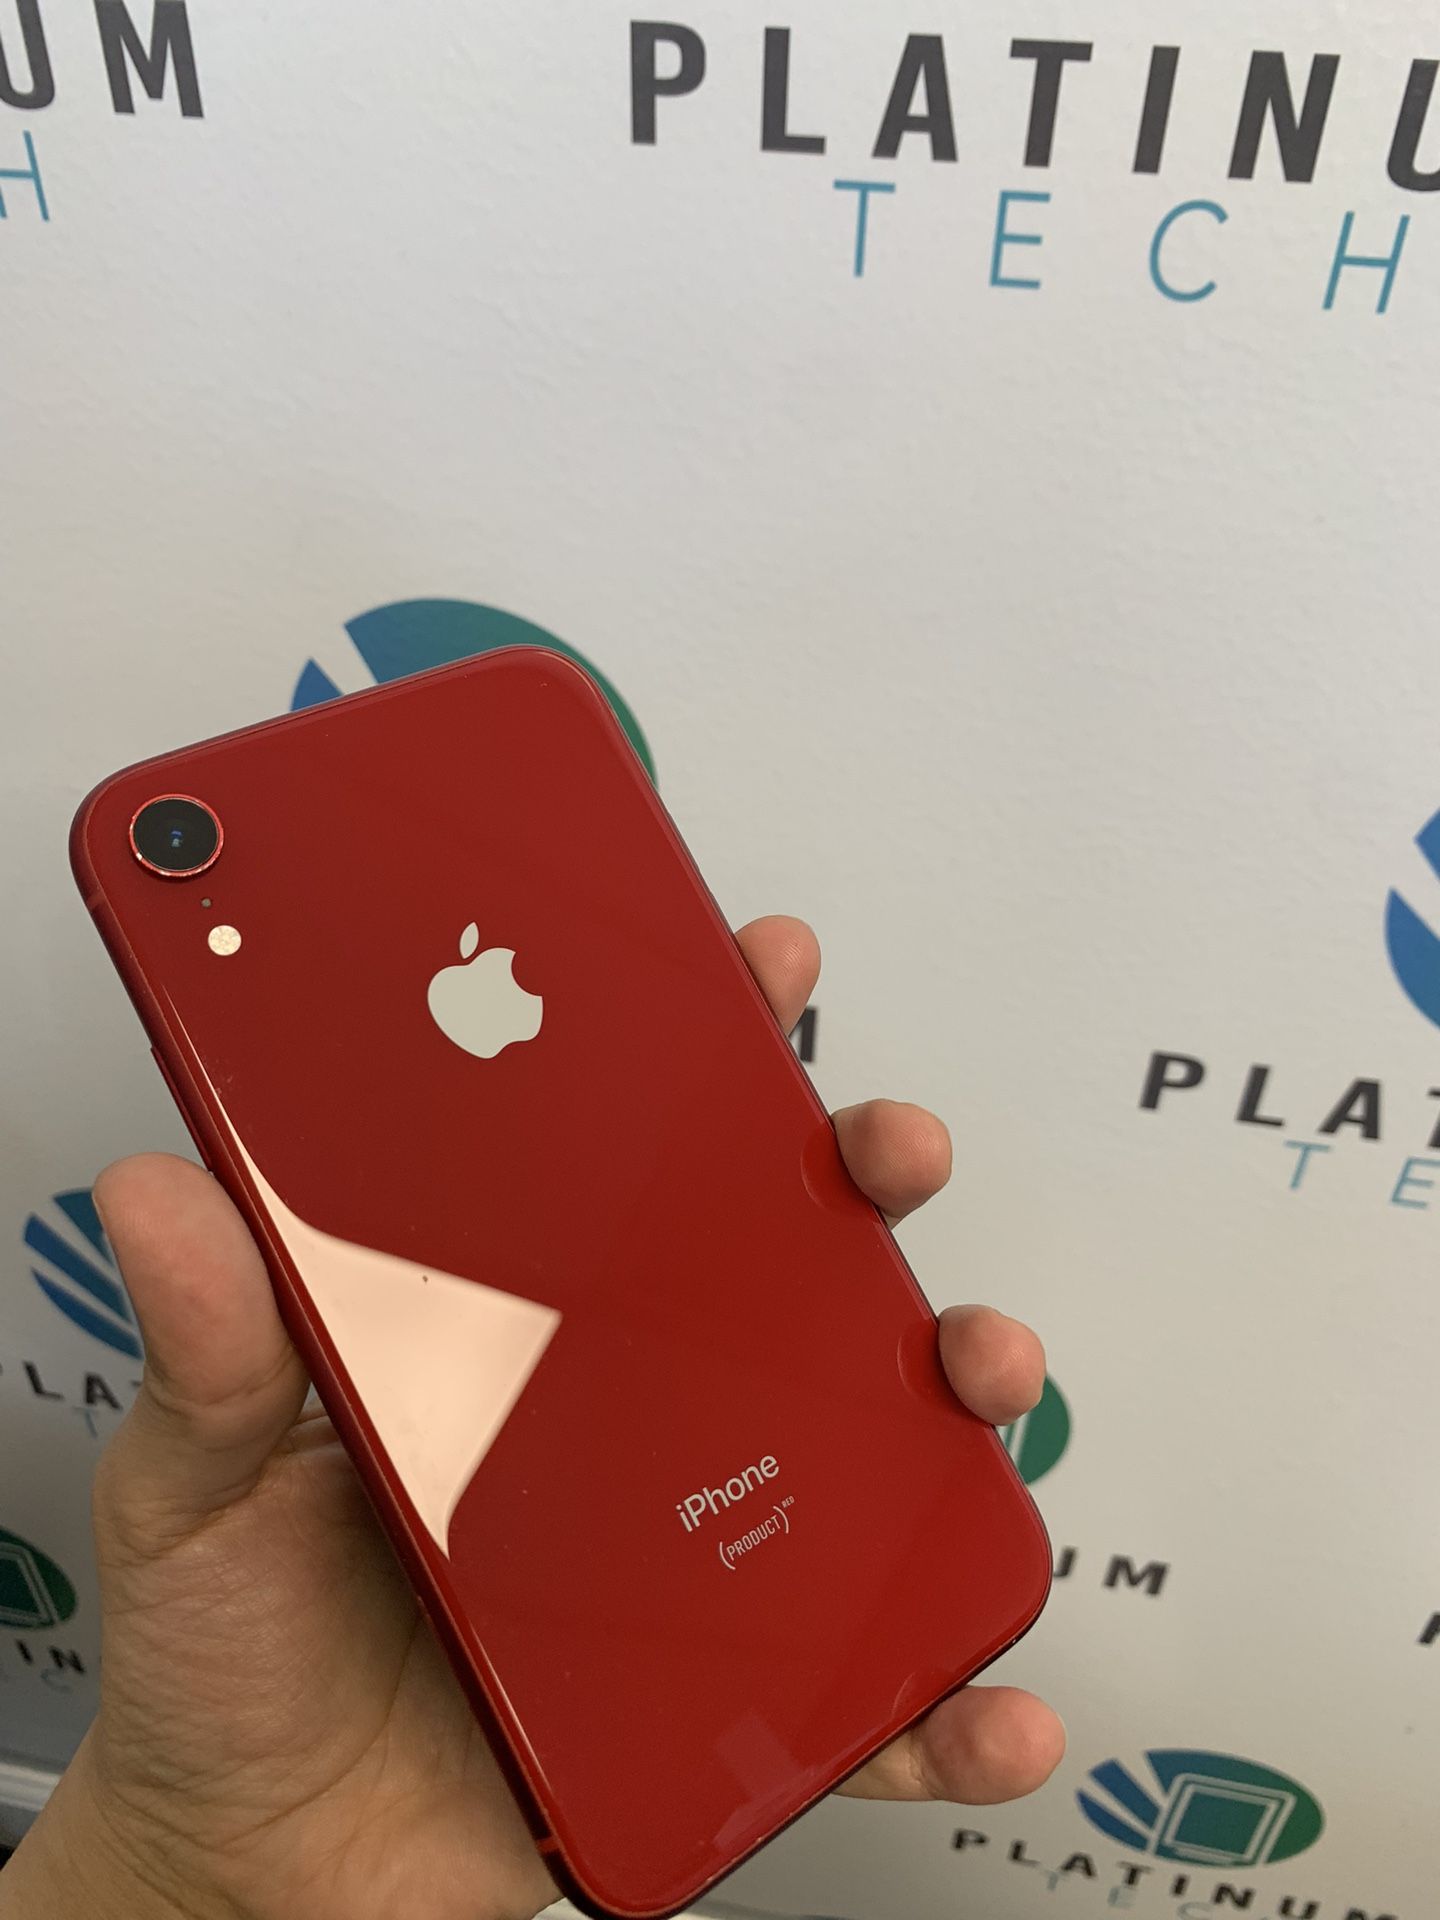 ❤️📱 iPhone XR 64 GB Unlocked BH81% 🔋 Case And Headphones For Free 💯❤️